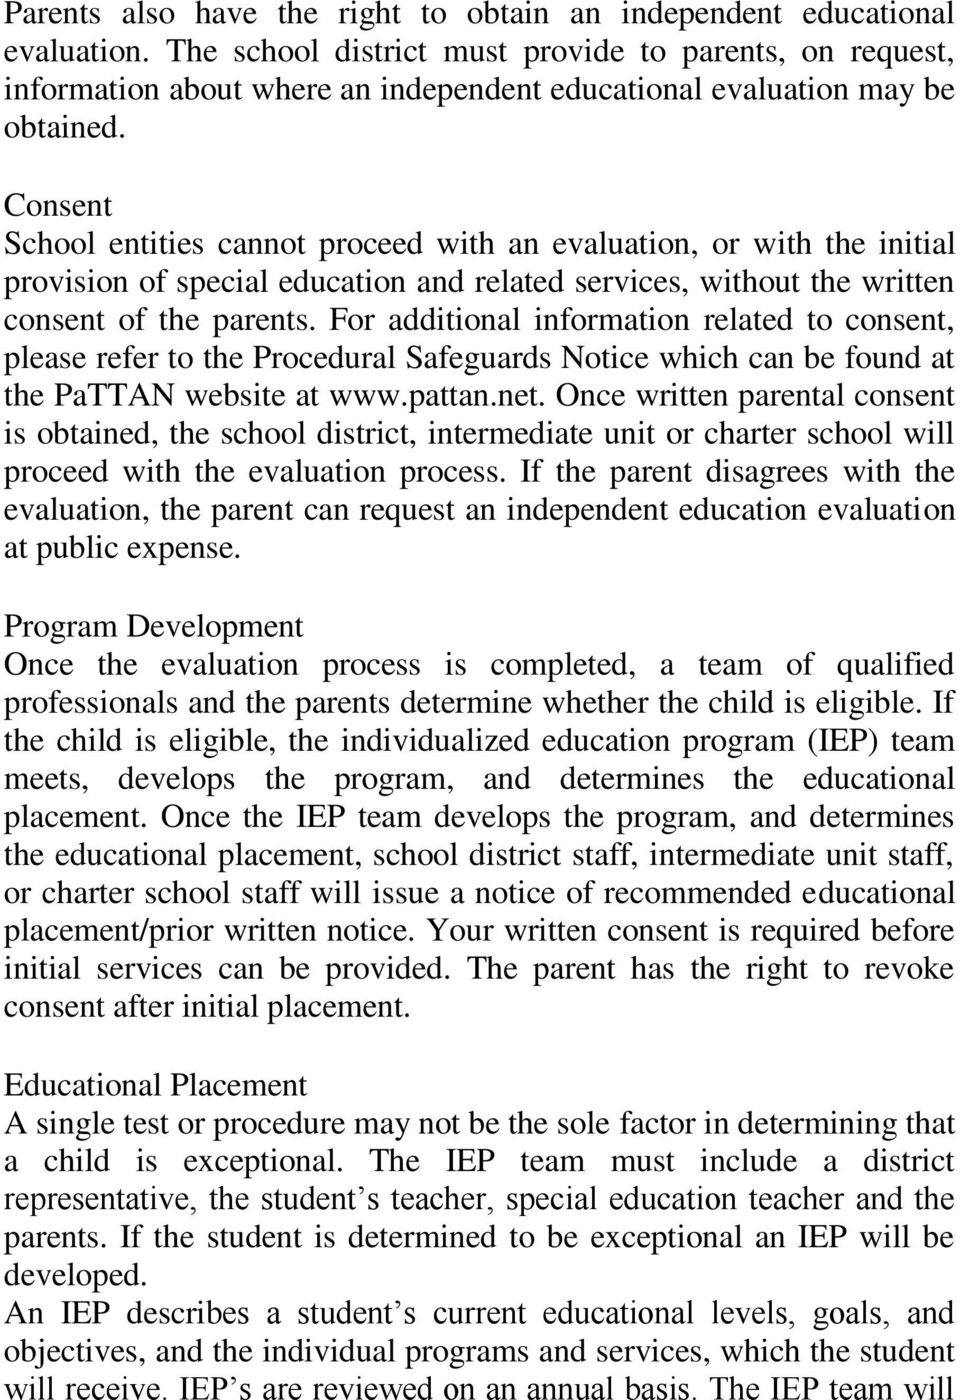 Consent School entities cannot proceed with an evaluation, or with the initial provision of special education and related services, without the written consent of the parents.